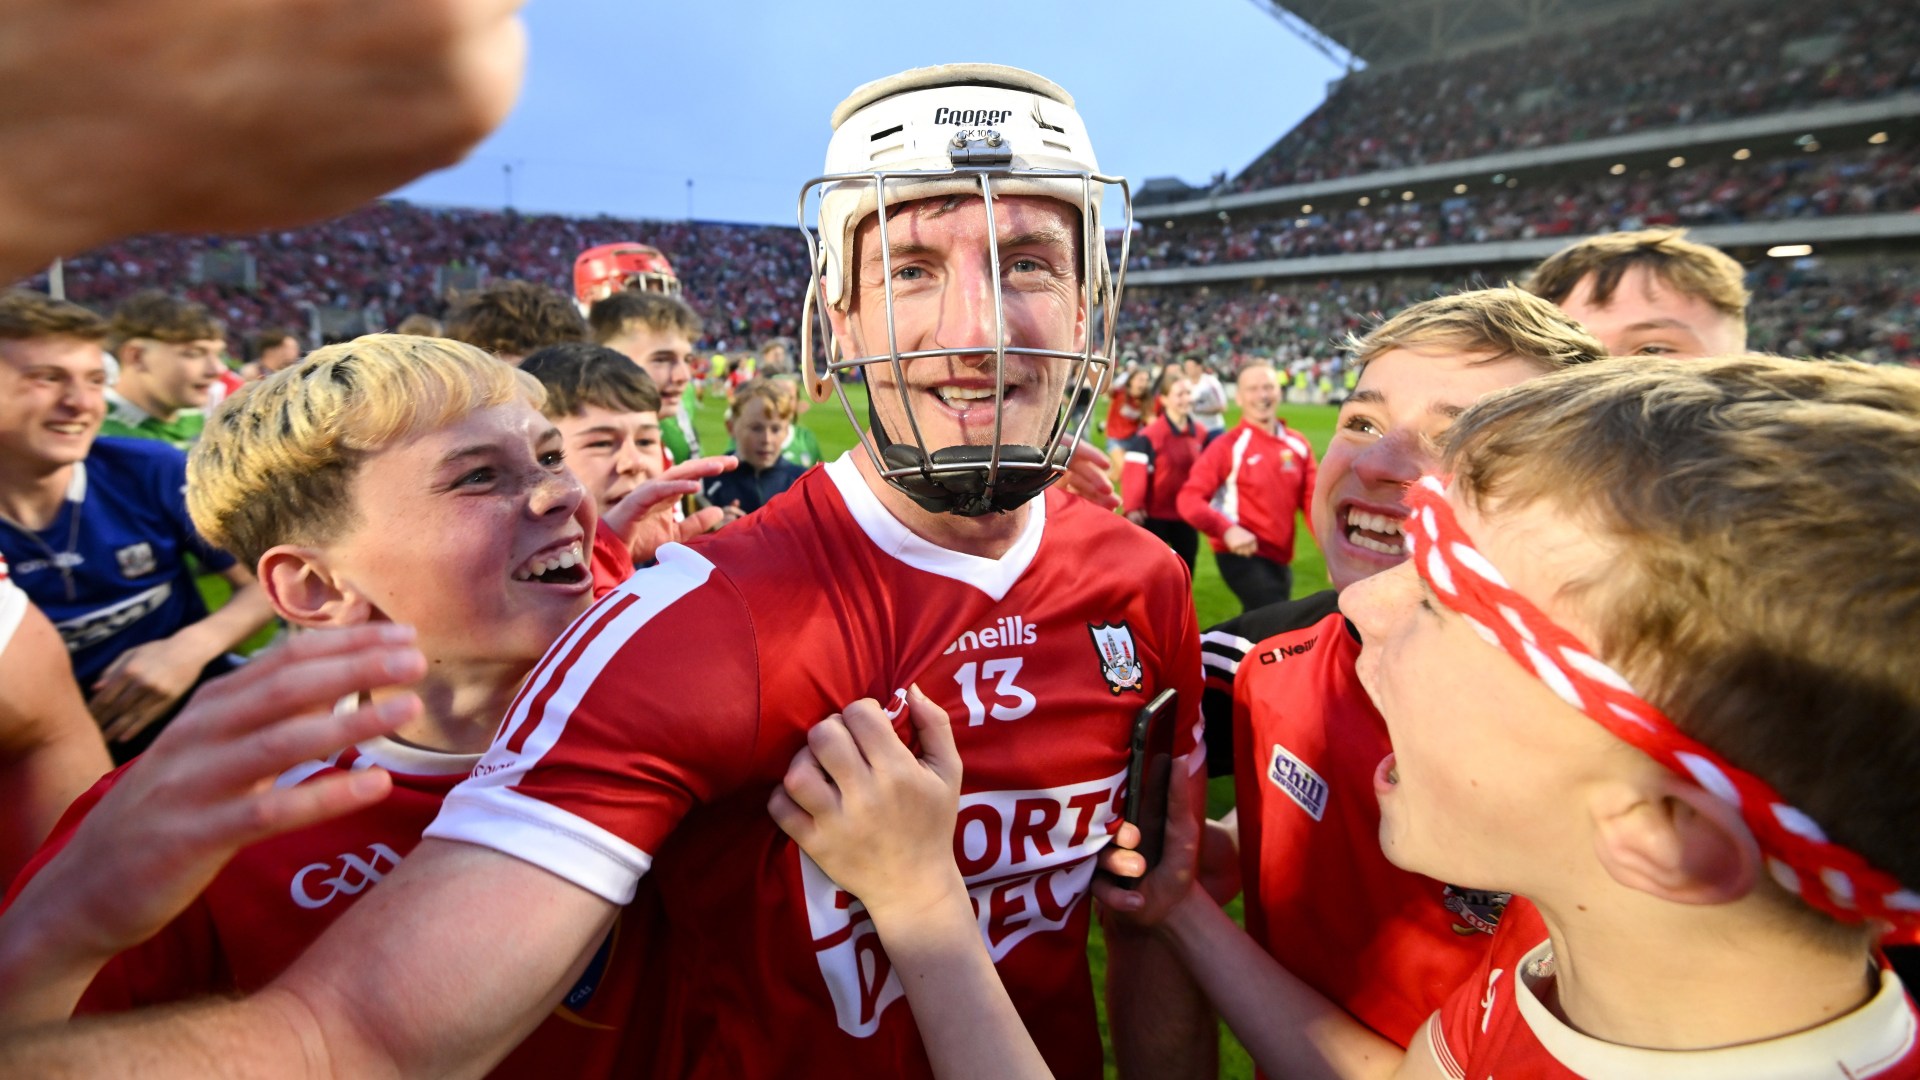 ‘I couldn’t help but be impressed by Cork in win vs Limerick – but form goes out the window when Rebels face Tipperary’ [Video]